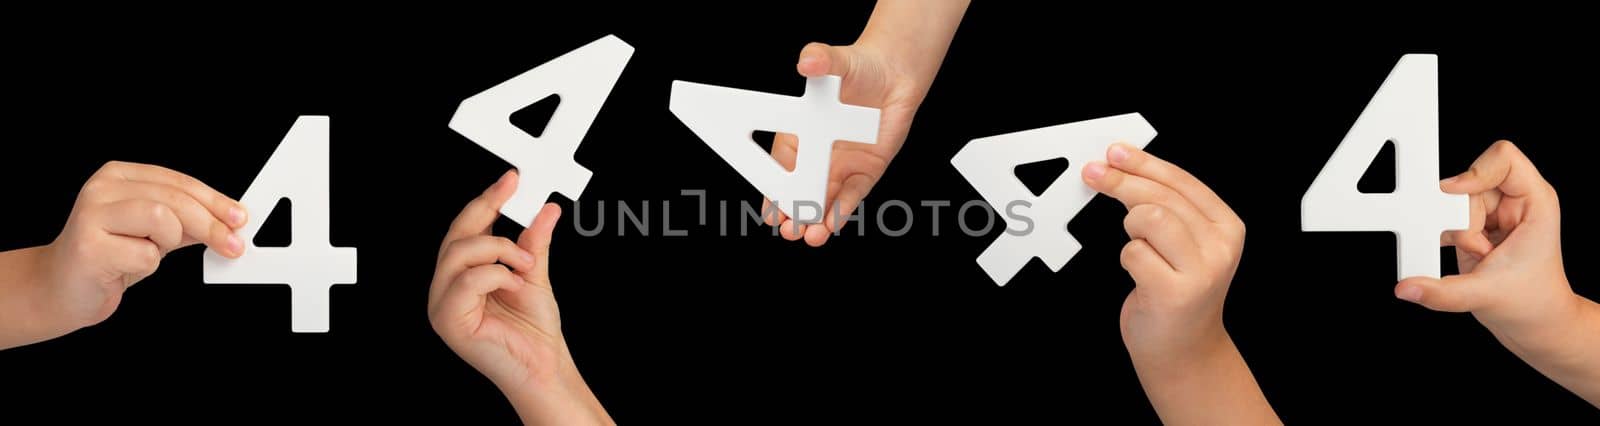 Number four in hand isolated on black background. Number four in a child's hand, holding on a black background. A large set of hands with numbers to insert into a project or design.